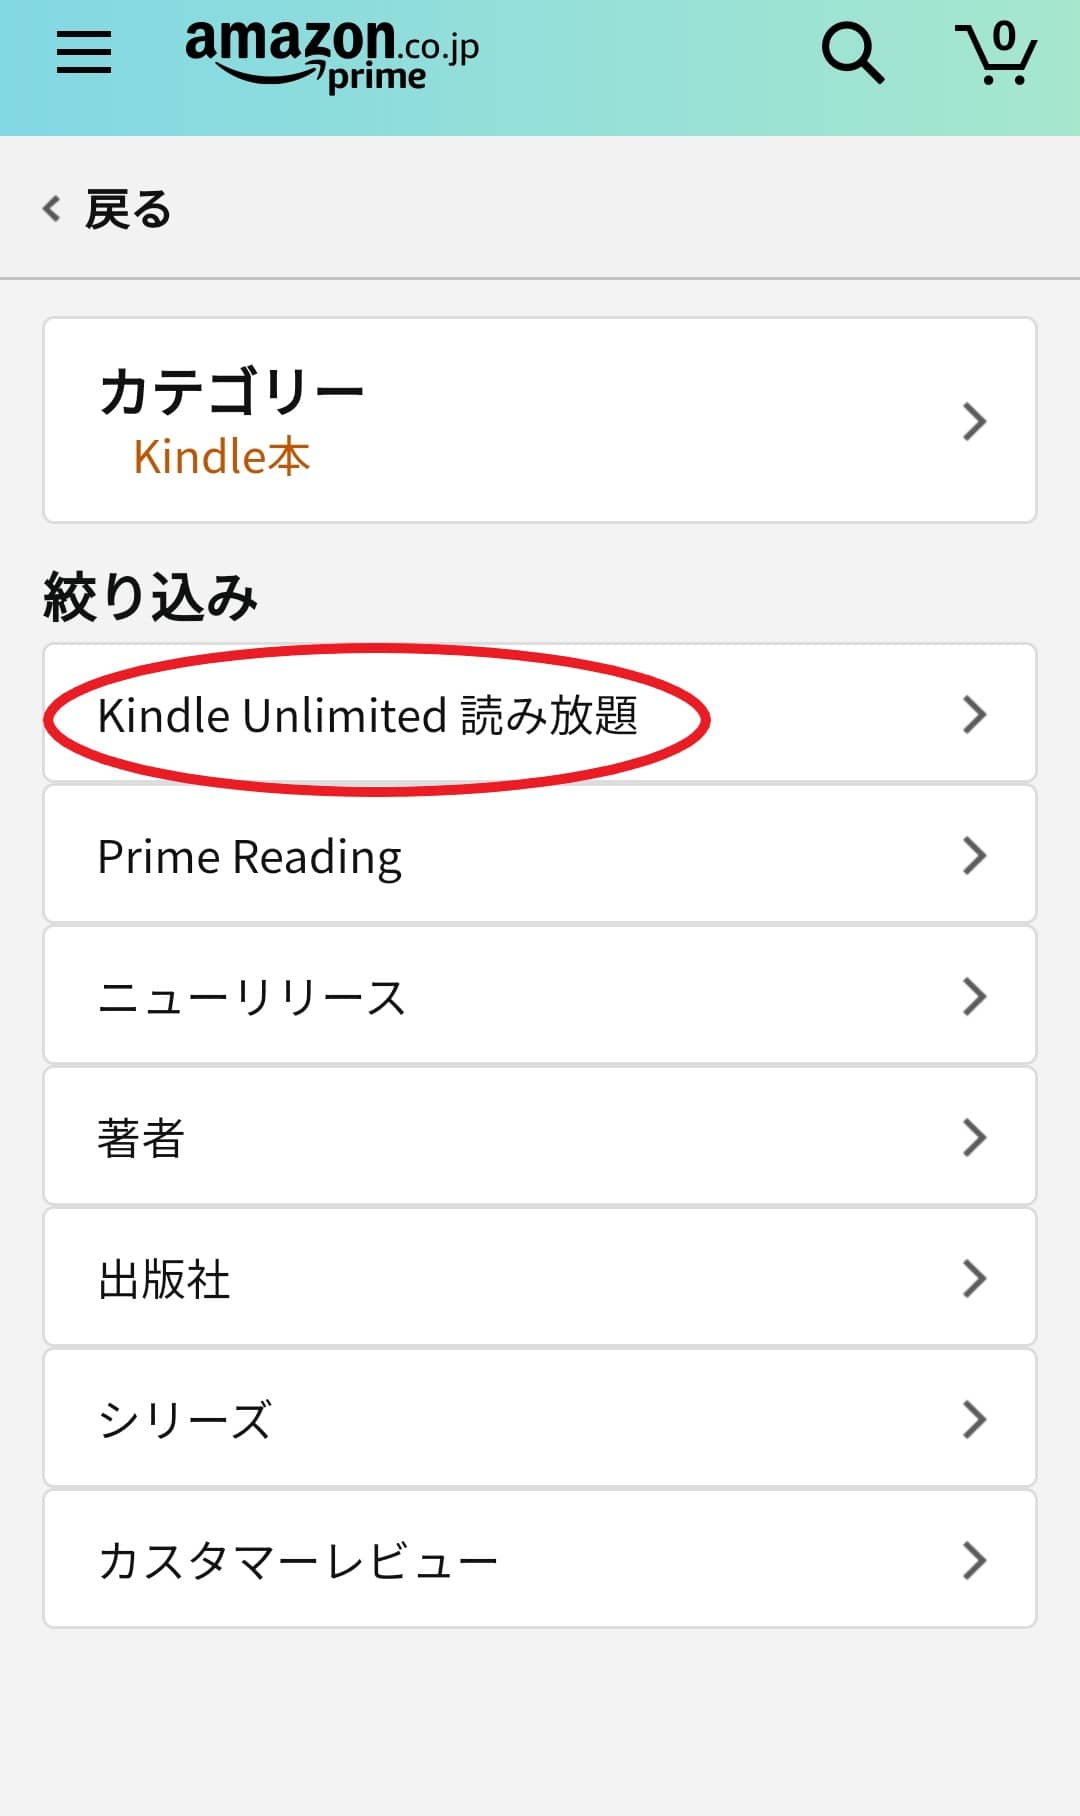 Kindle Unlimitedを表示する画像。